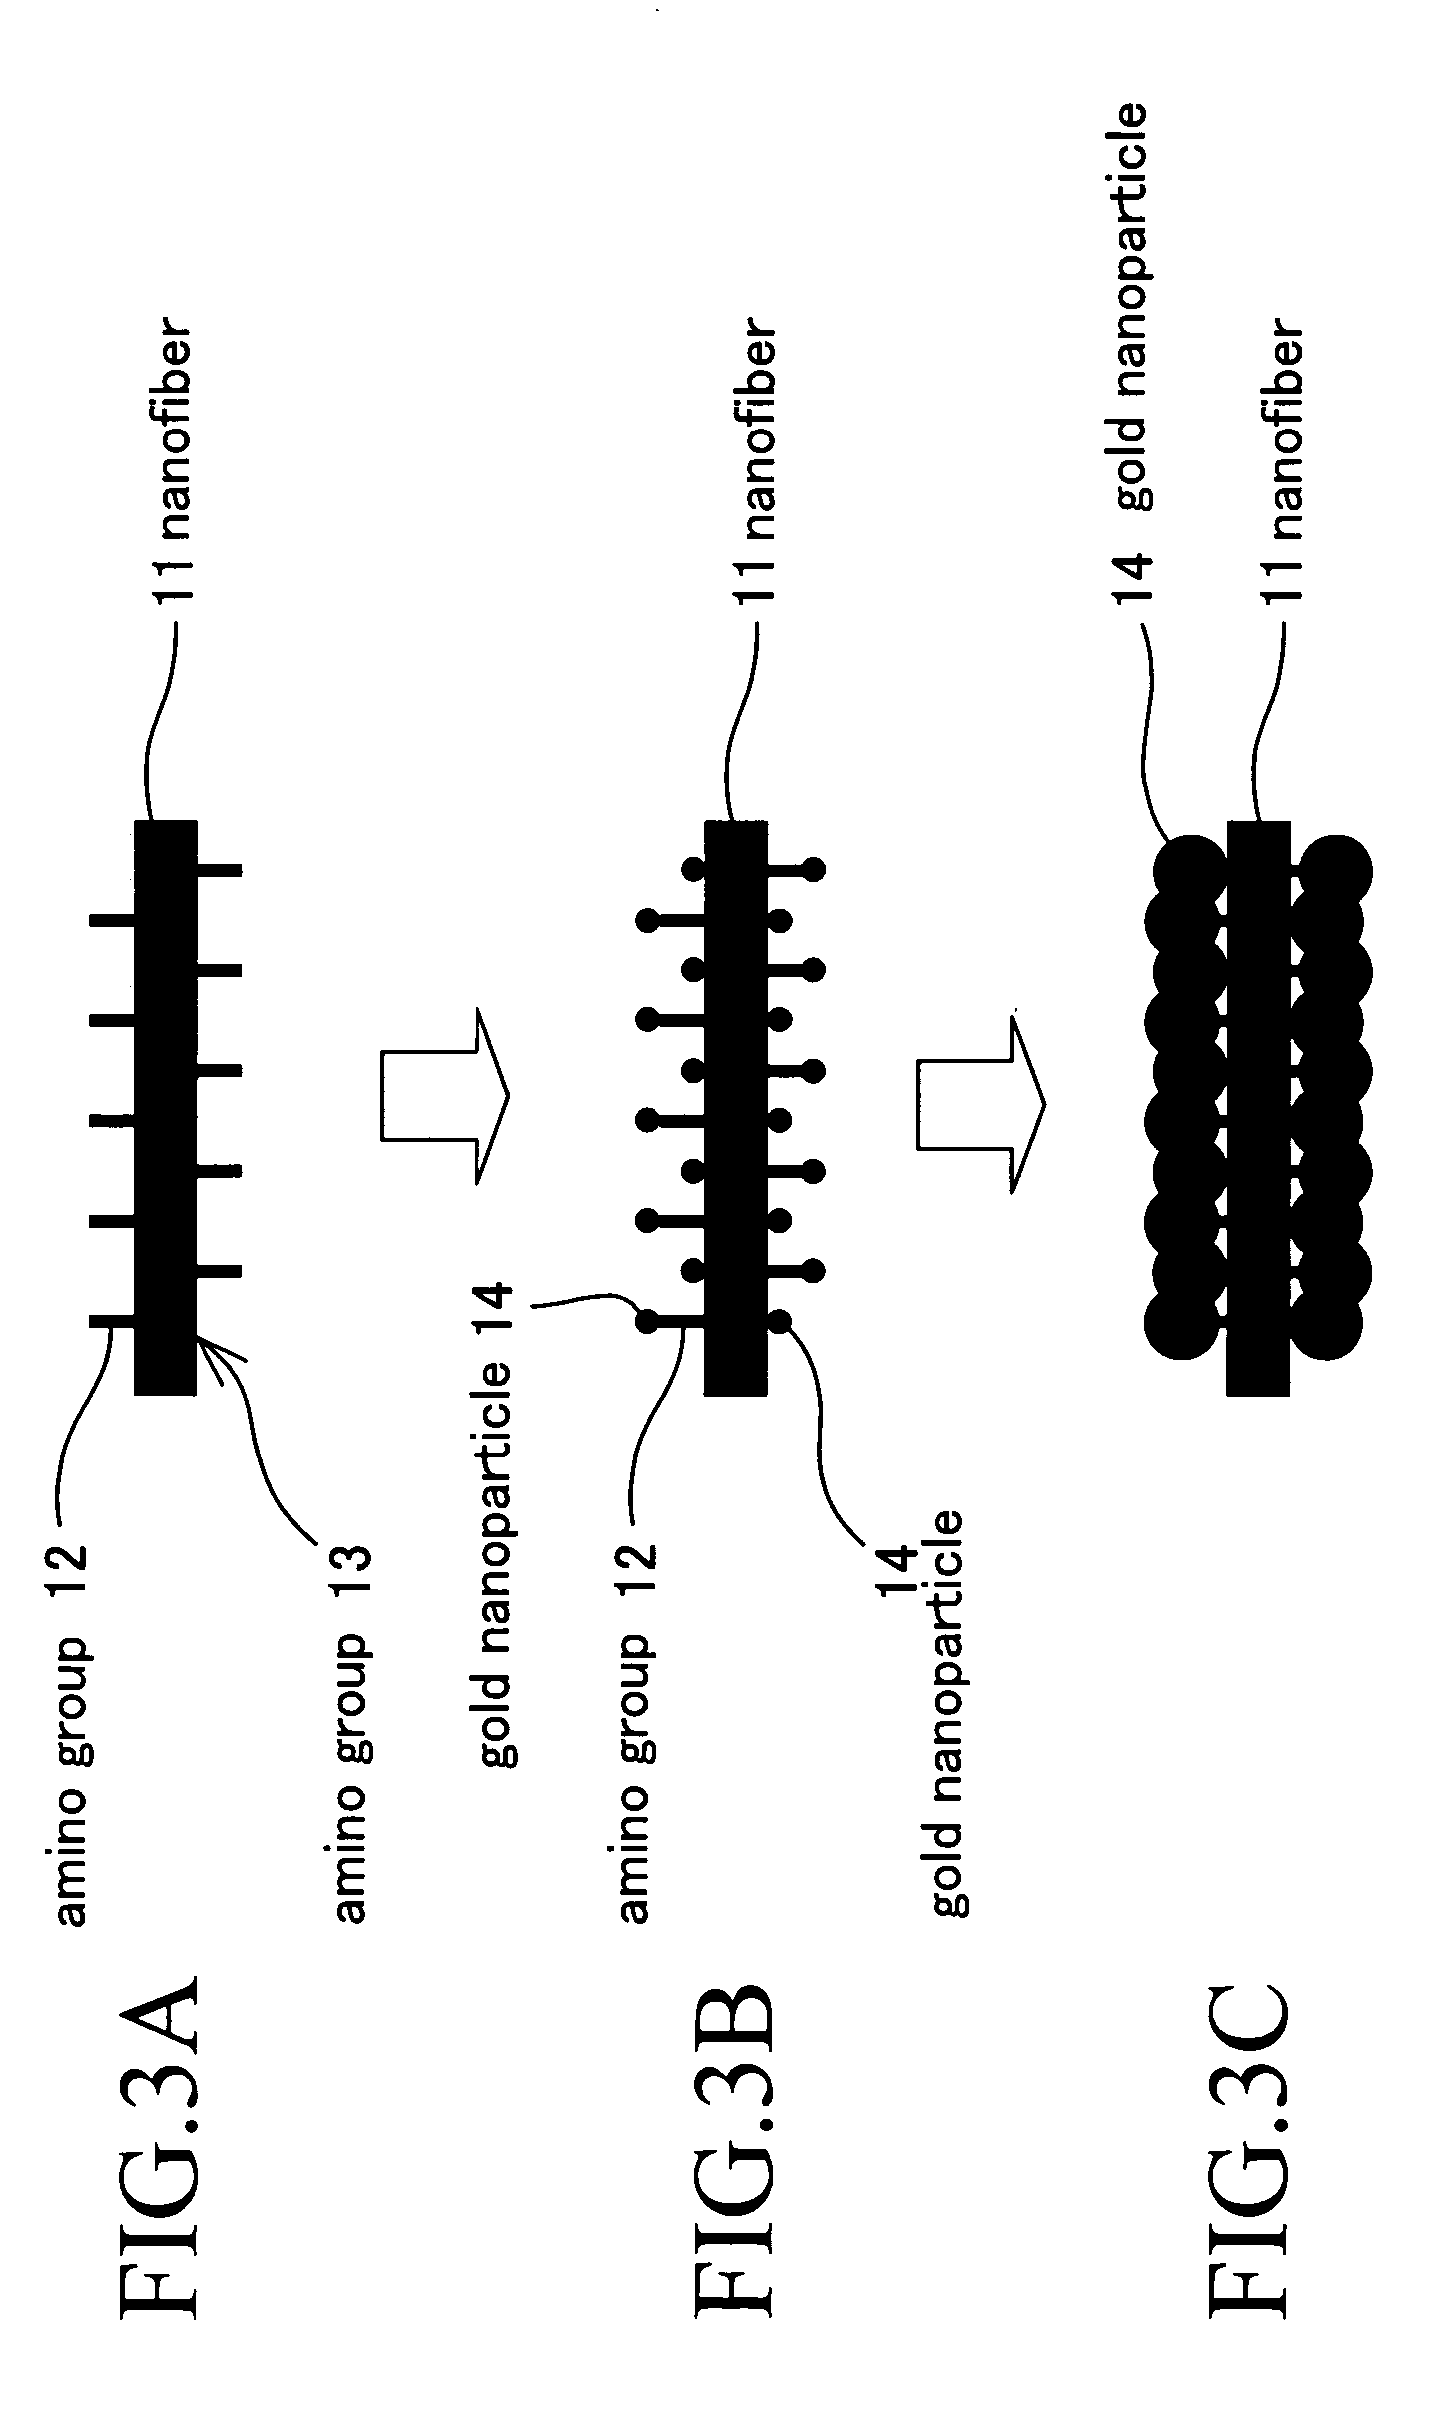 Conductive peptide nanofiber and method of manufacture of the same